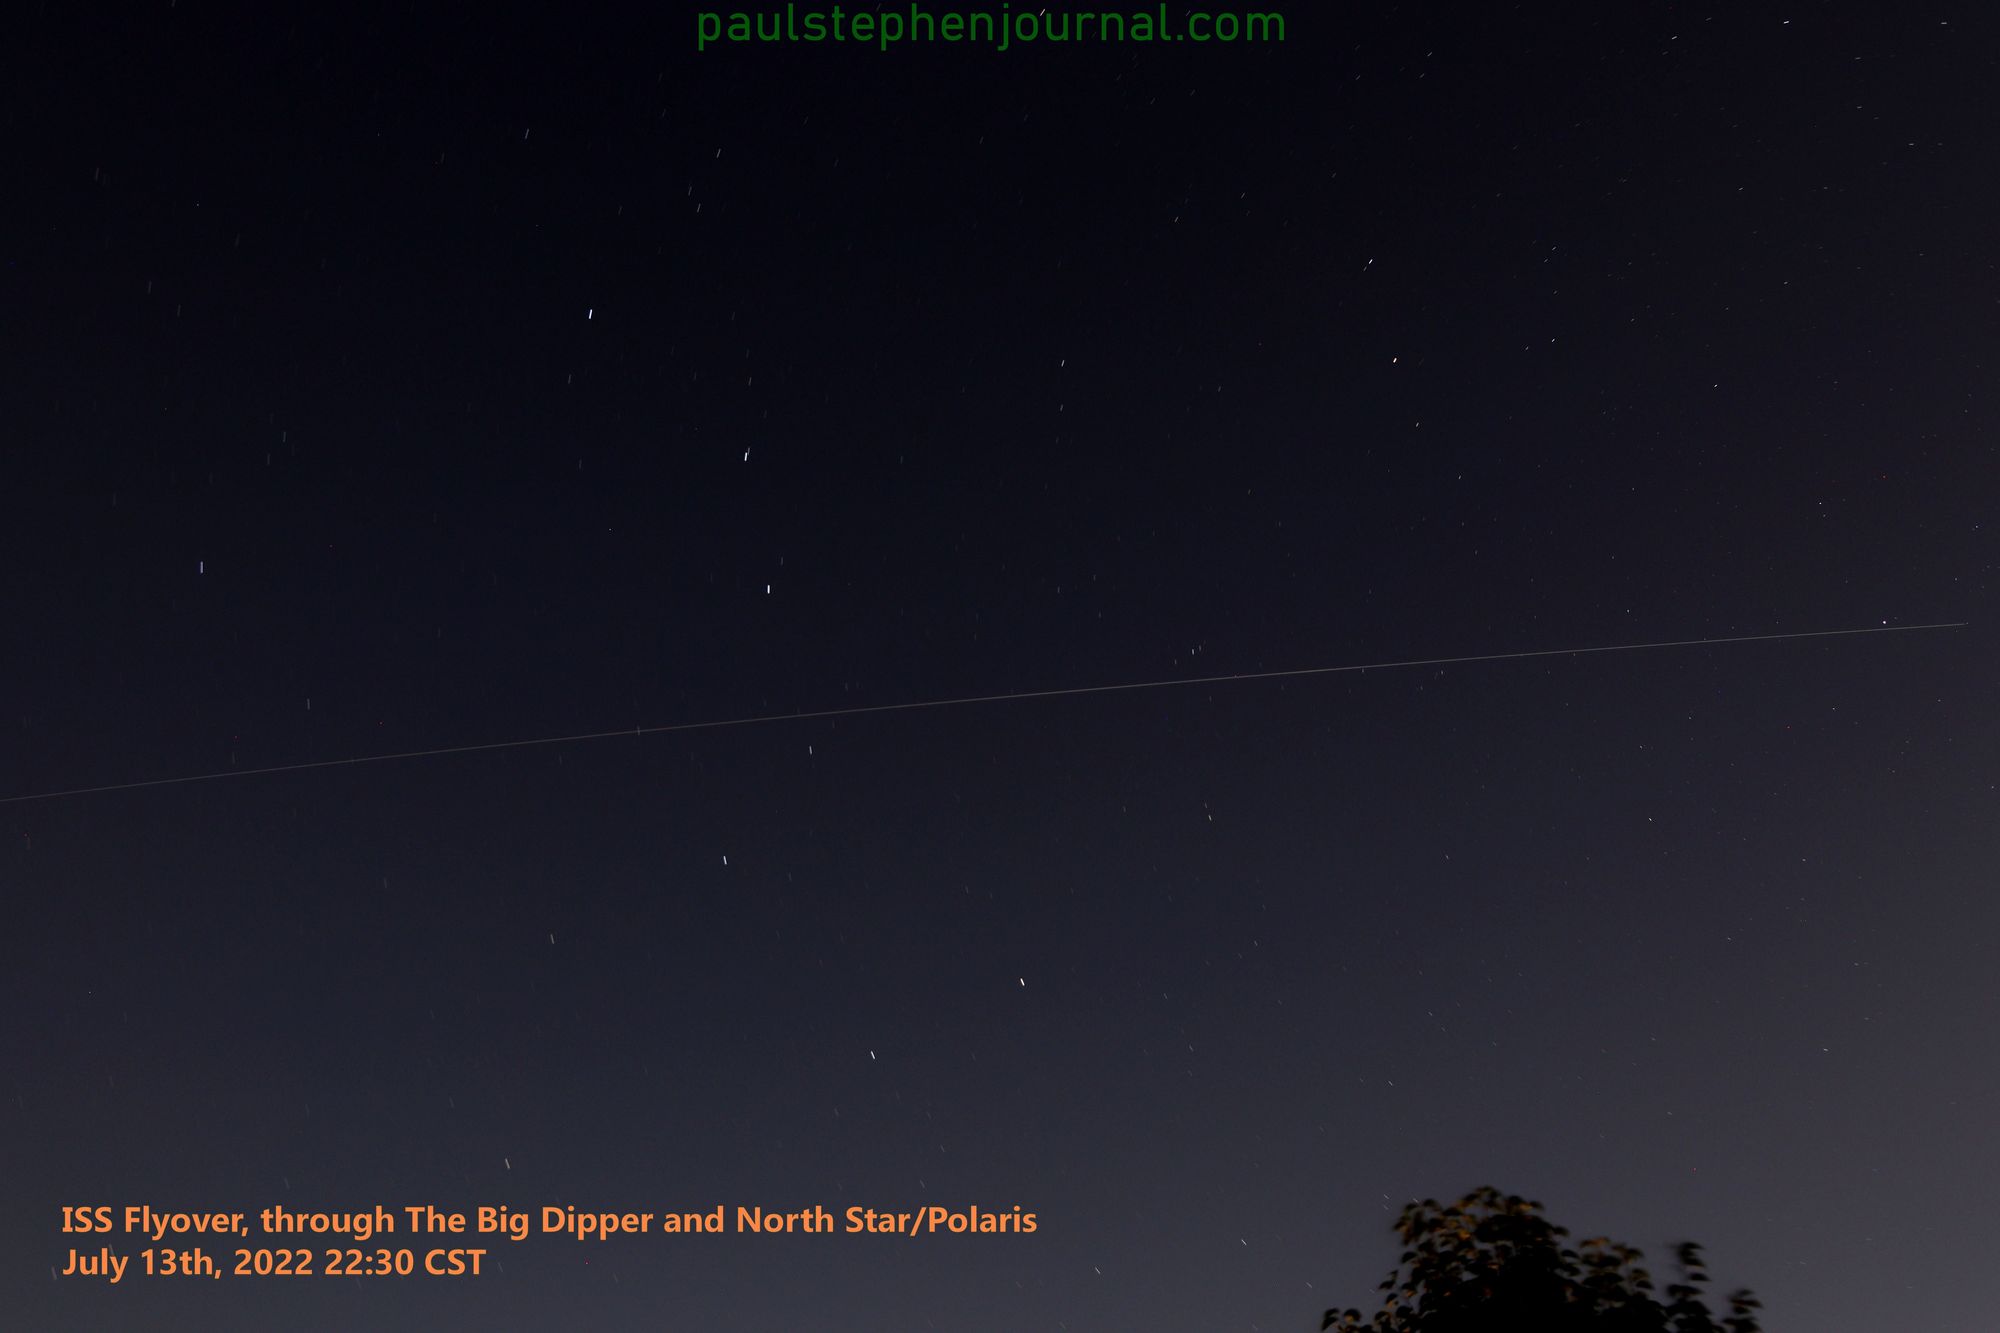 ISS Travels Through The Big Dipper, and By The North Star